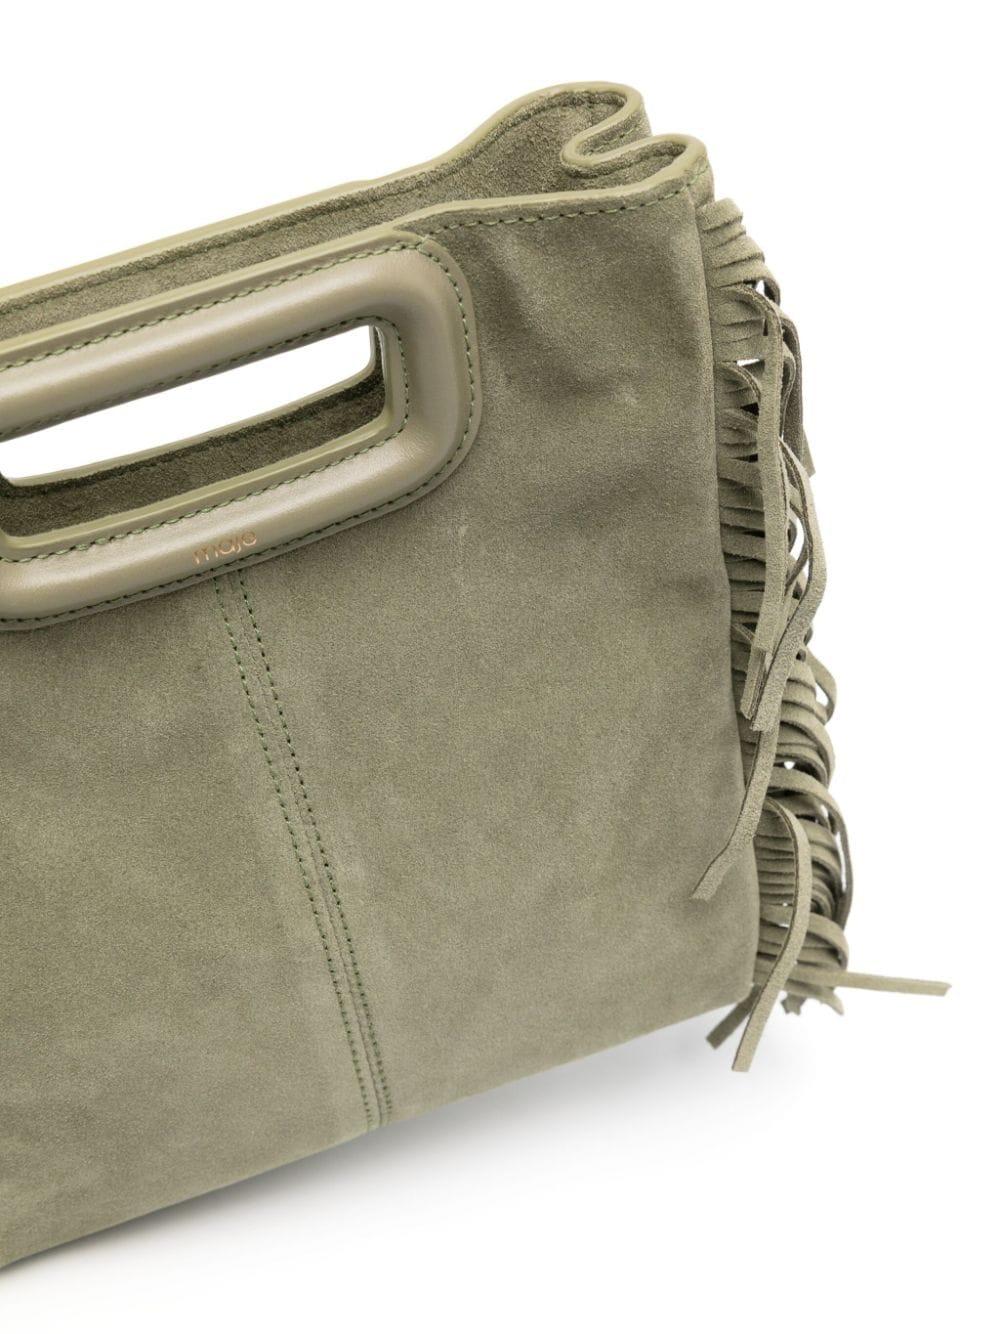 Maje Fringed Suede Crossbody Bag in Green | Lyst